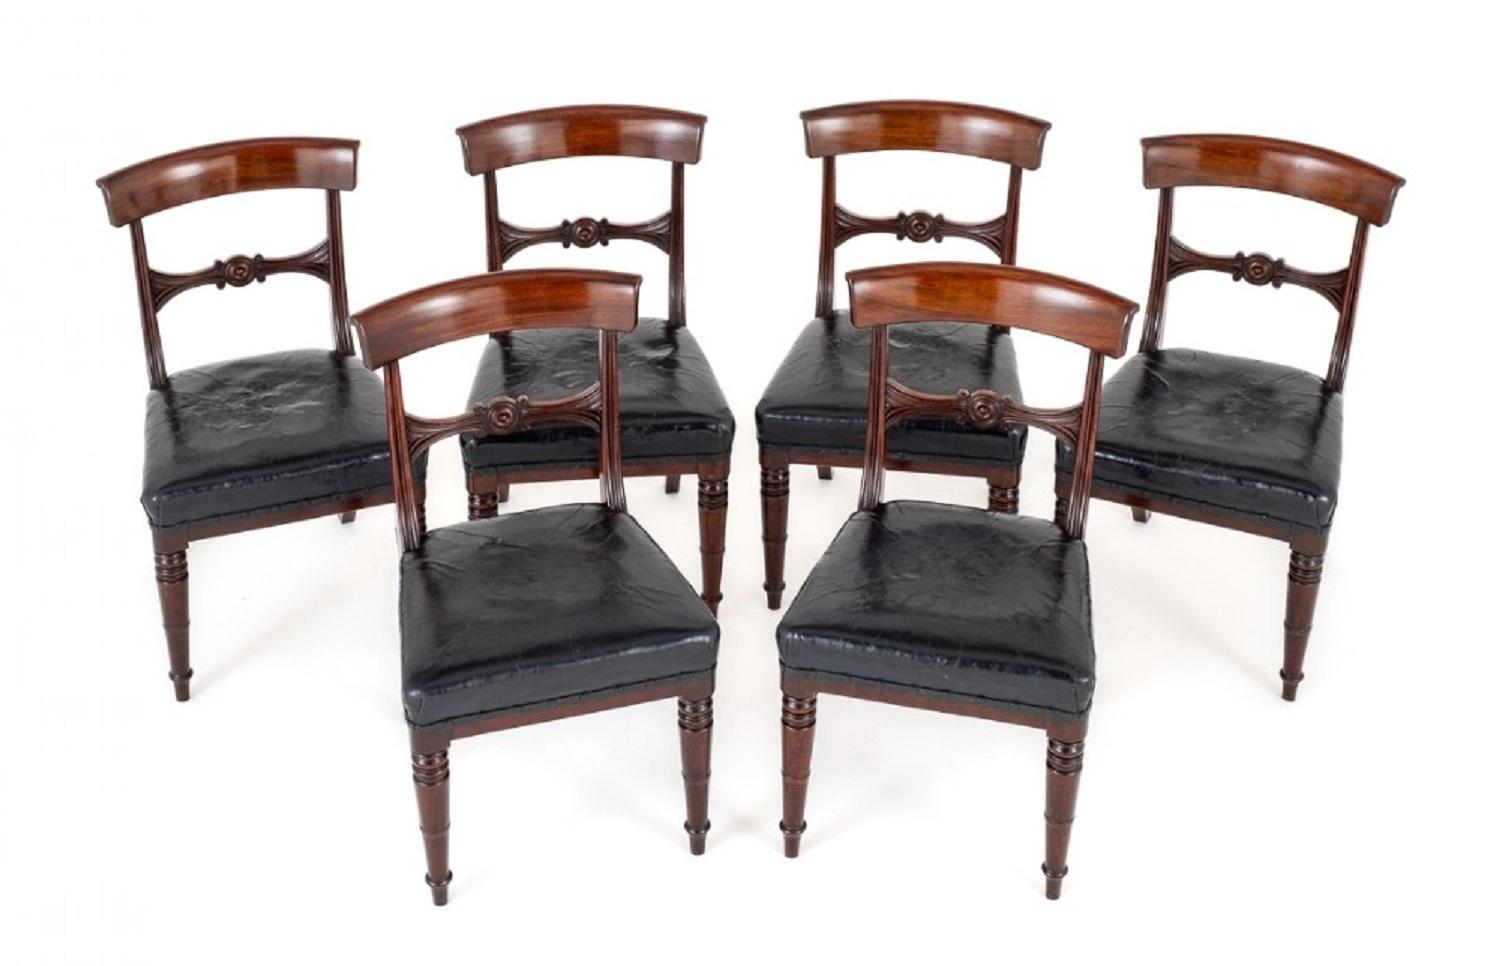 Set of 6 regency mahogany dining chairs.
The chairs are raised upon ring turned front legs with swept back legs.
The chairs feature leather stuff over seats.
The backs of the chairs having fluted uprights and a carved and turned centre rail.
The